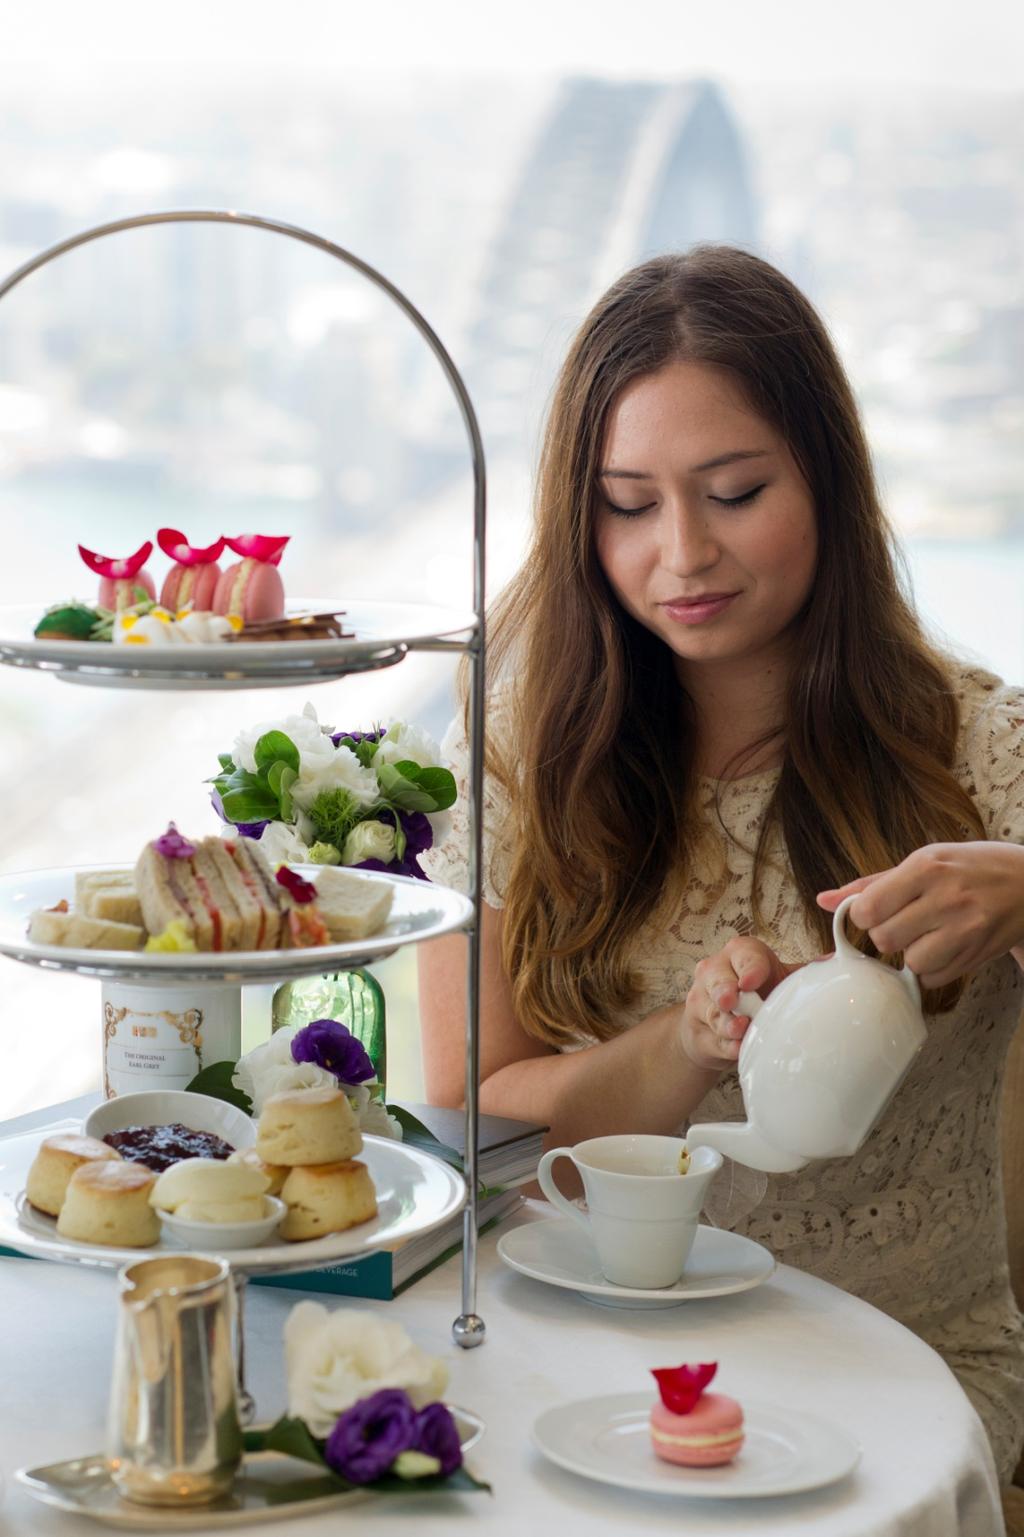 Presentation of Tea & Food Serving Food Present food in elegant tiered trays when serving High Tea for small groups of two or three